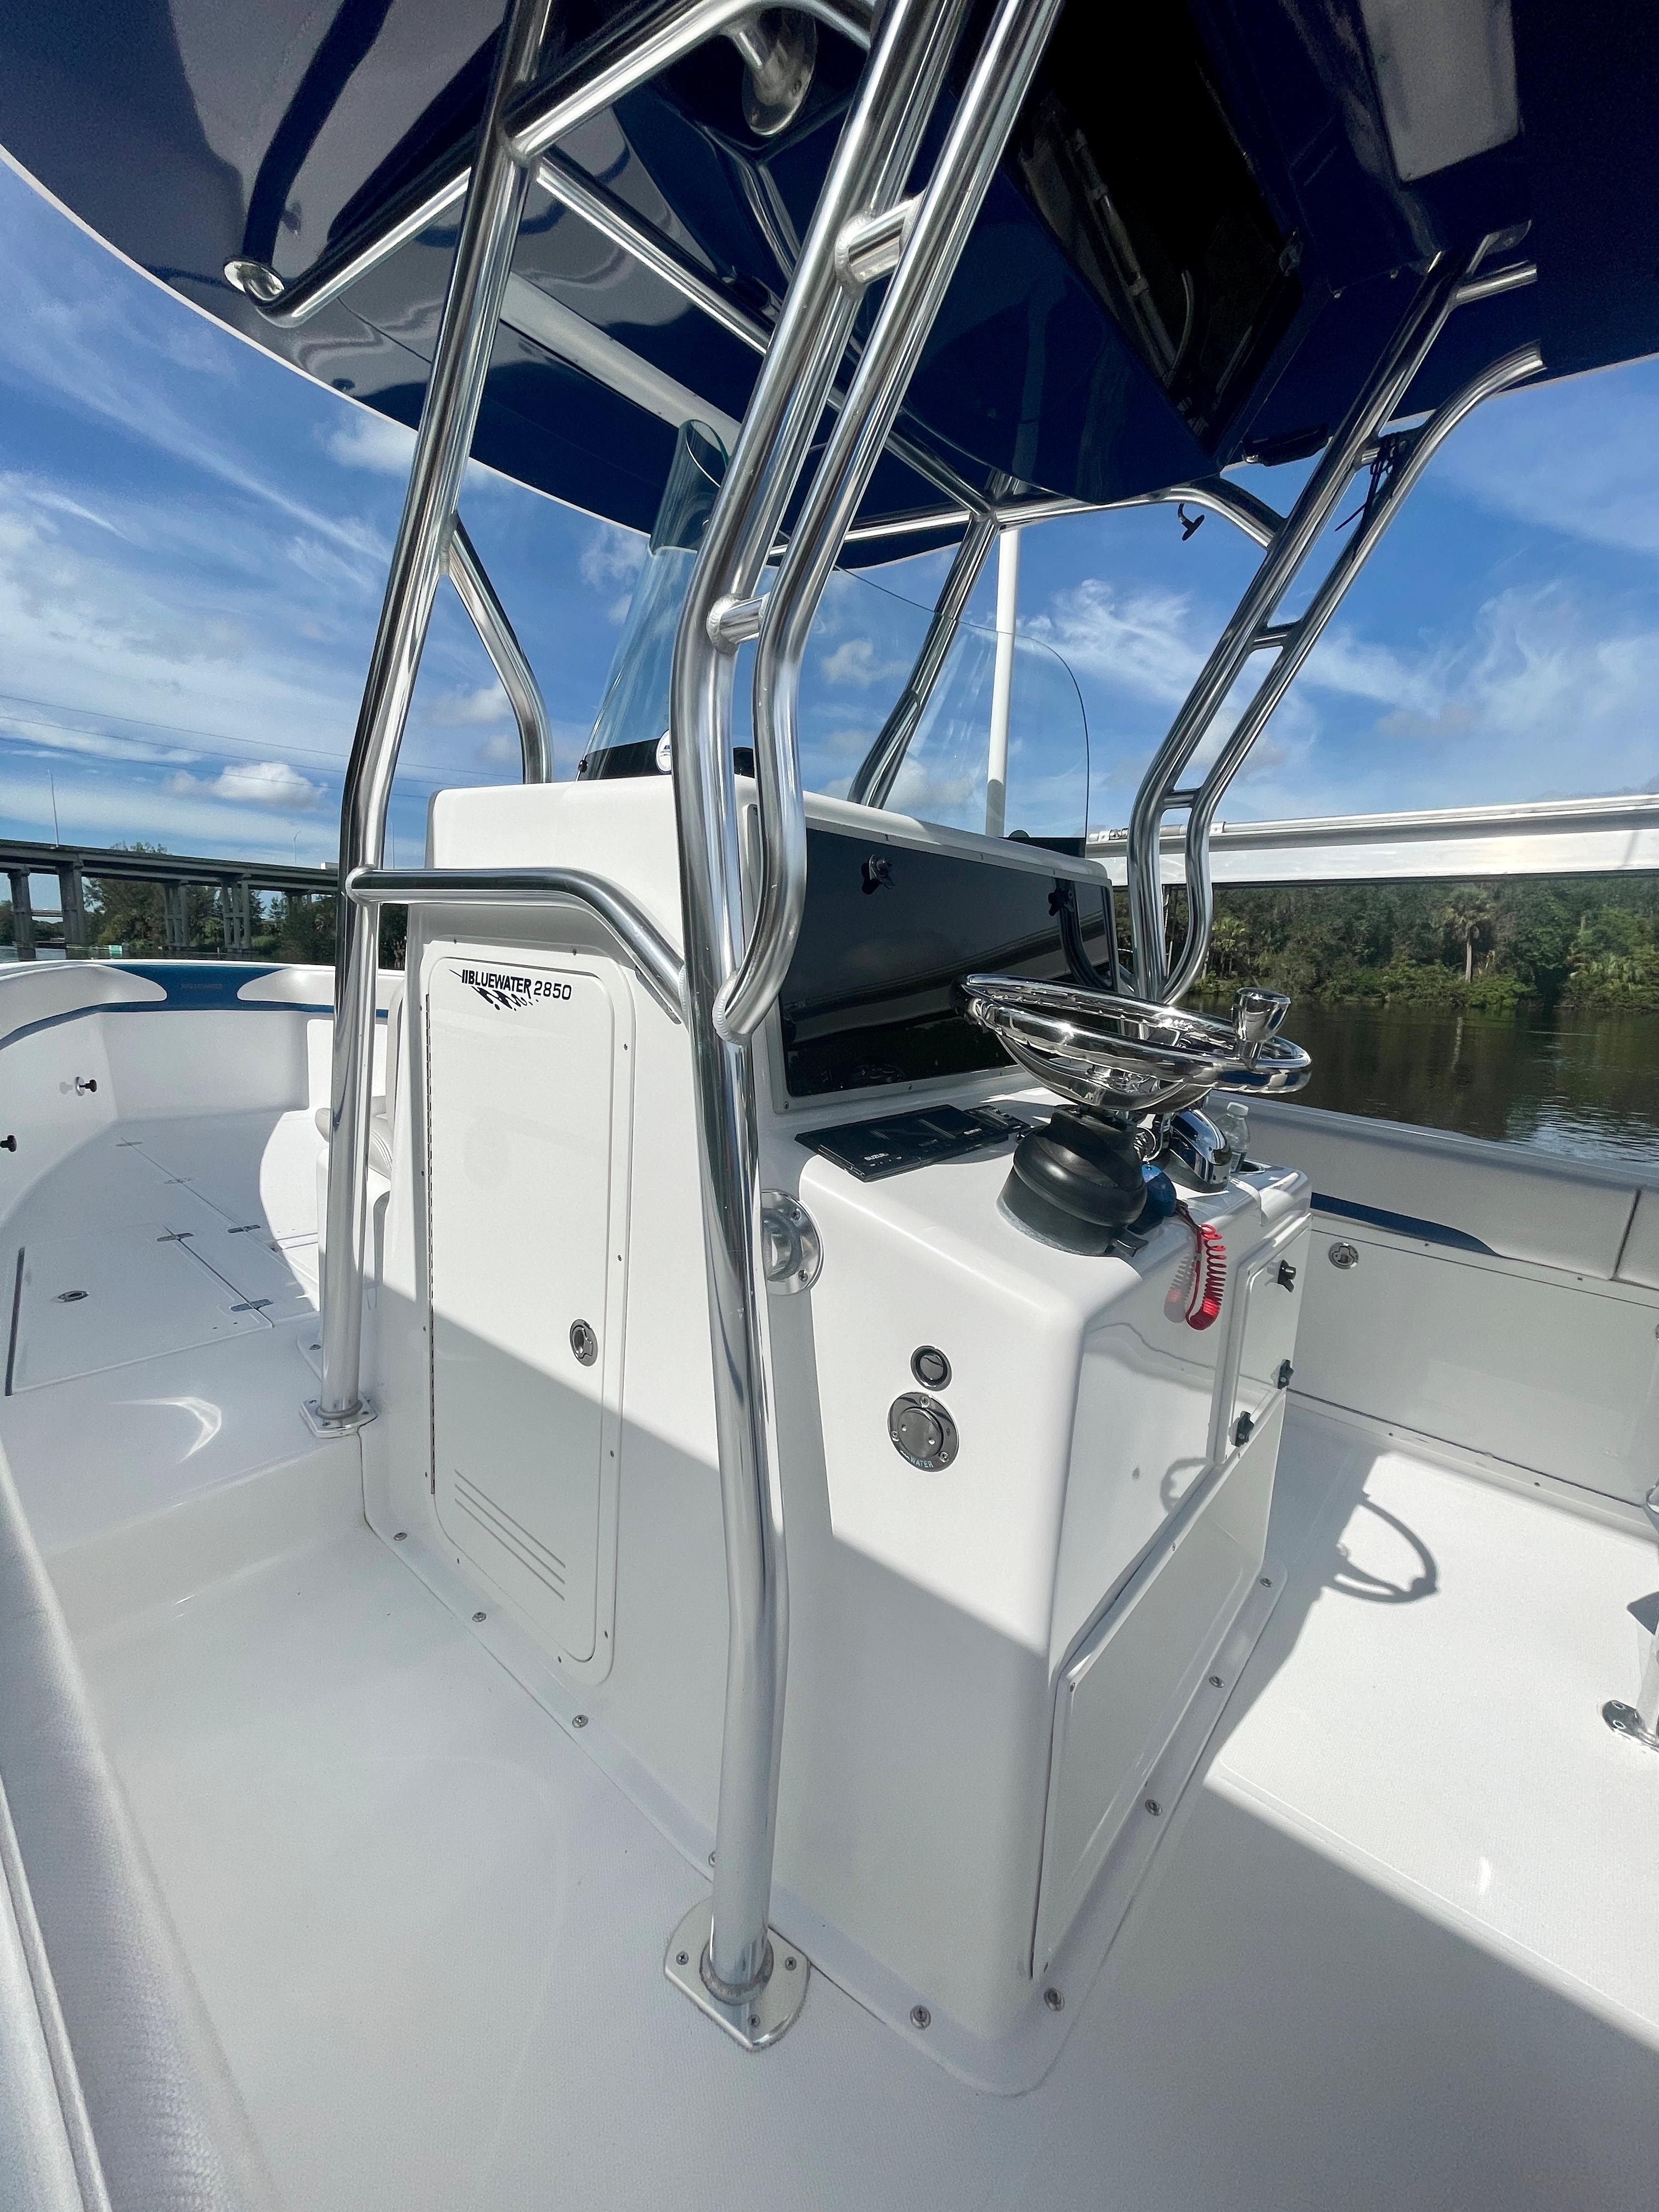 2016 Bluewater 2850 - Center console